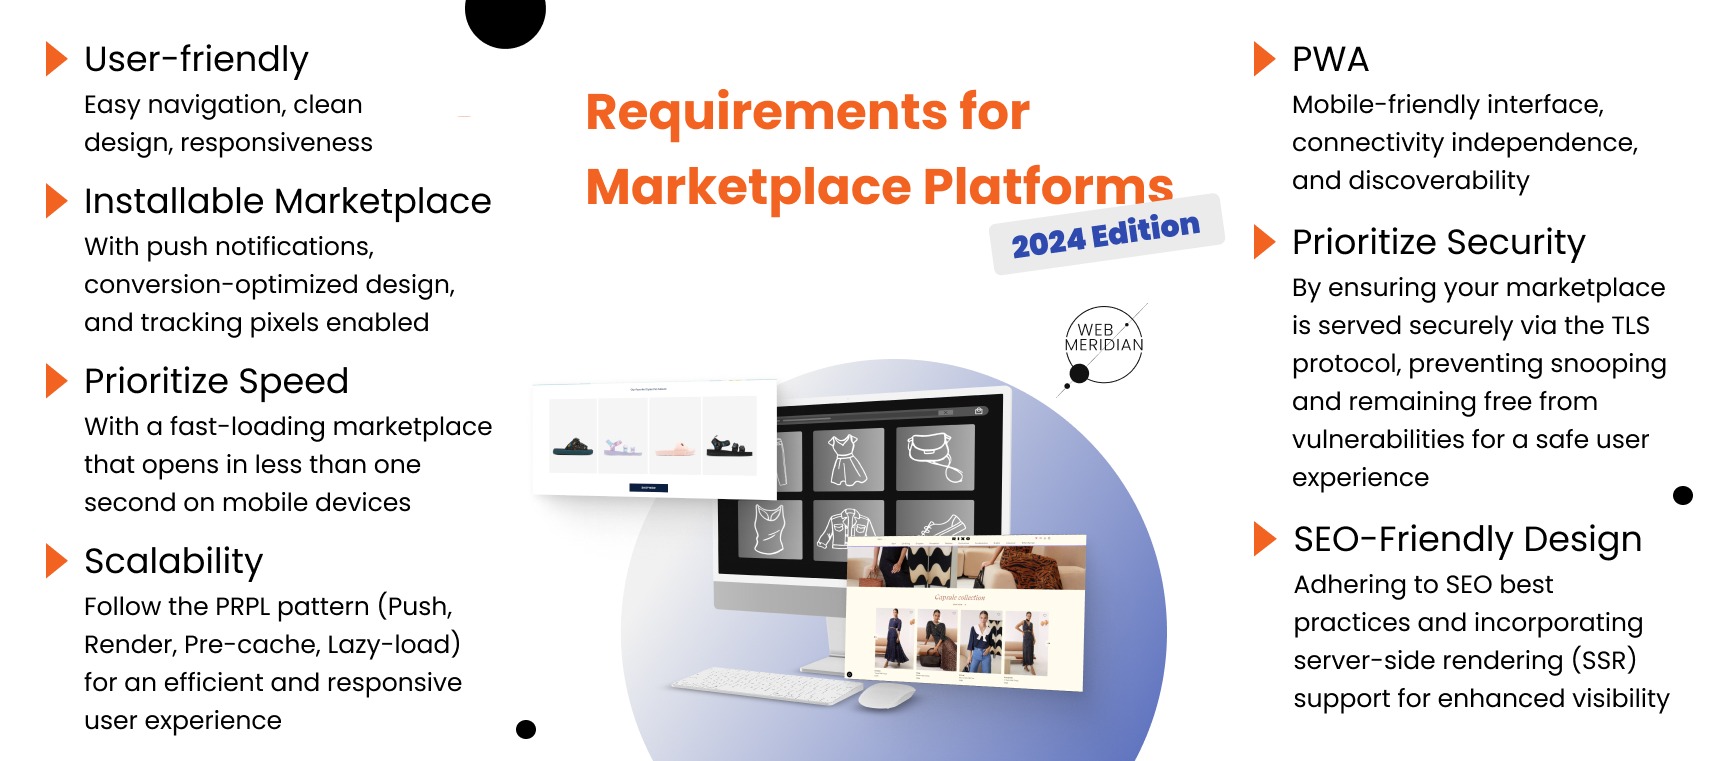 Requirements for Marketplace Platforms